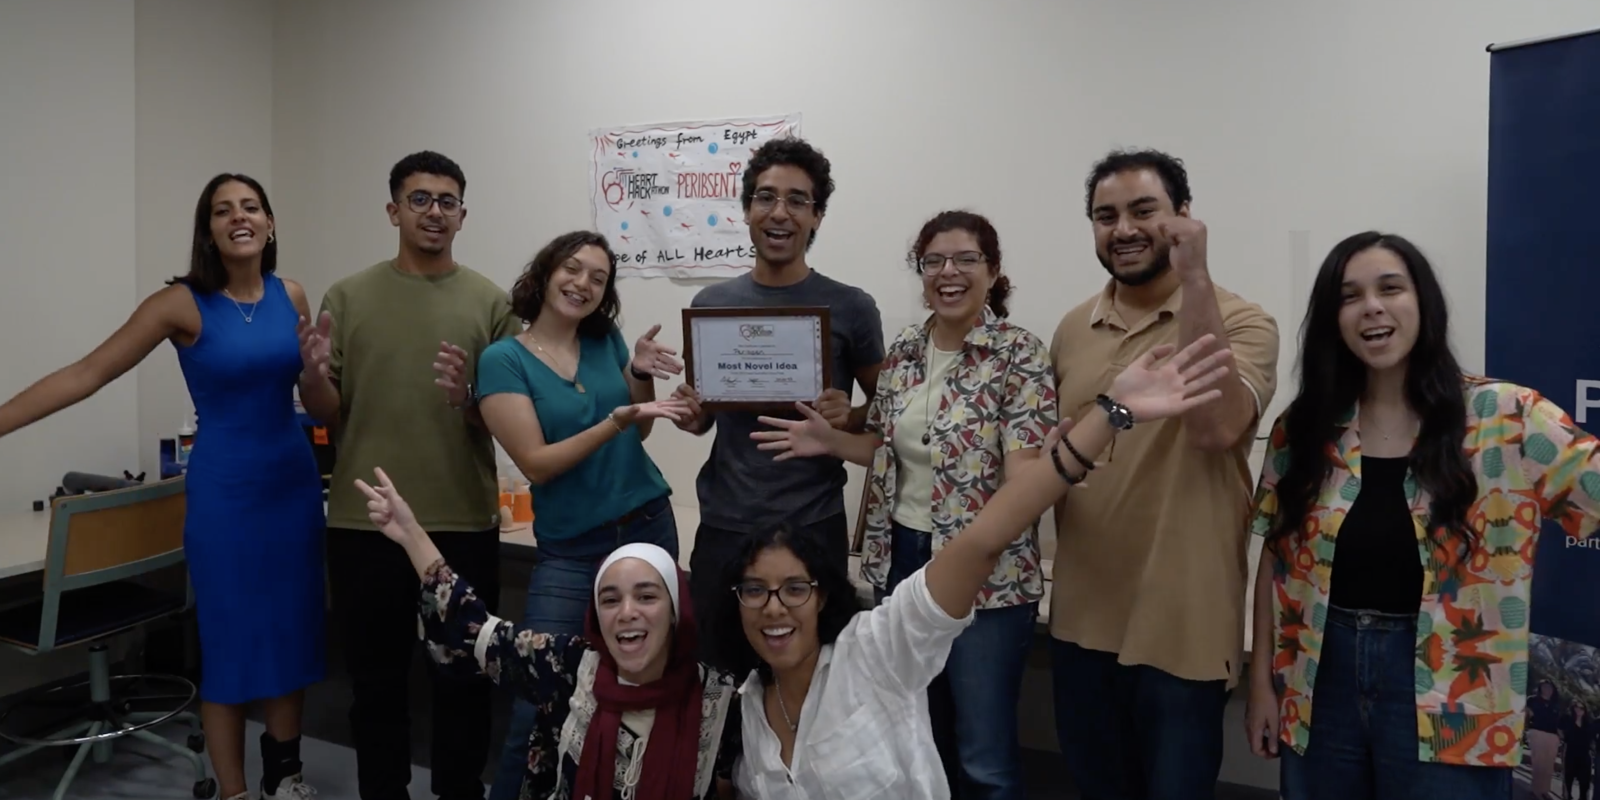 AUC students smiling and holding their Most Novel Idea certificate for their total artificial heart